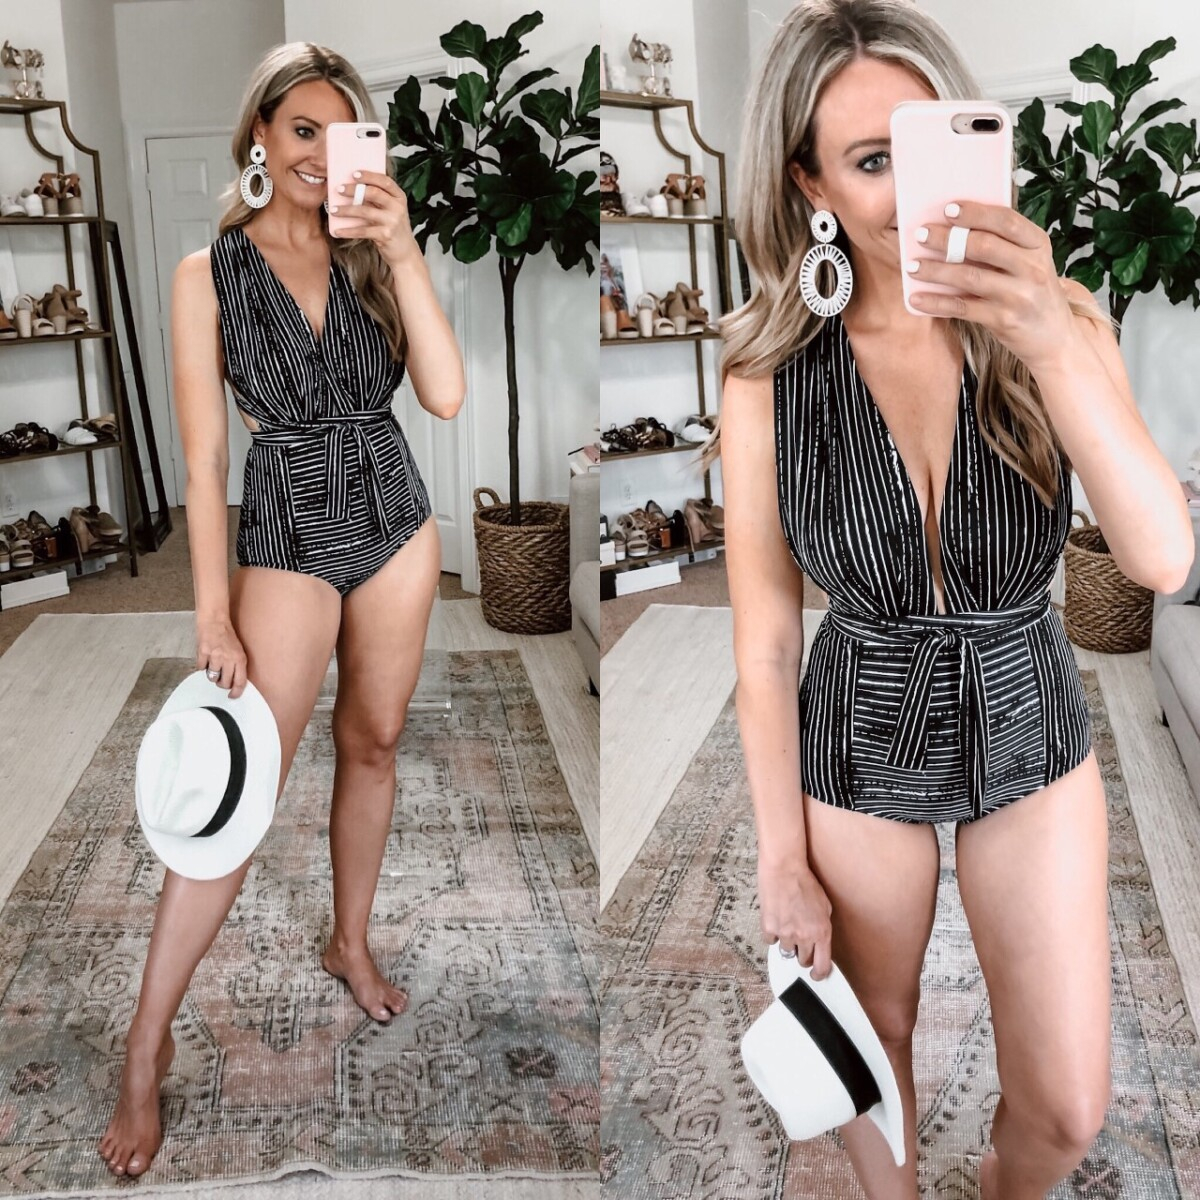 one piece swmisuit | Amazon Spring Try On by popular Houston fashion blog, Cute and Little: image of a woman wearing a Amazon COCOSHIP Retro One Piece Backless Bather Swimsuit, Amazon BaubleStar Raffia Tassel Hoop Drop Earrings, and holding a Amazon Lanzom Women Wide Brim Straw Panama Roll up Hat.